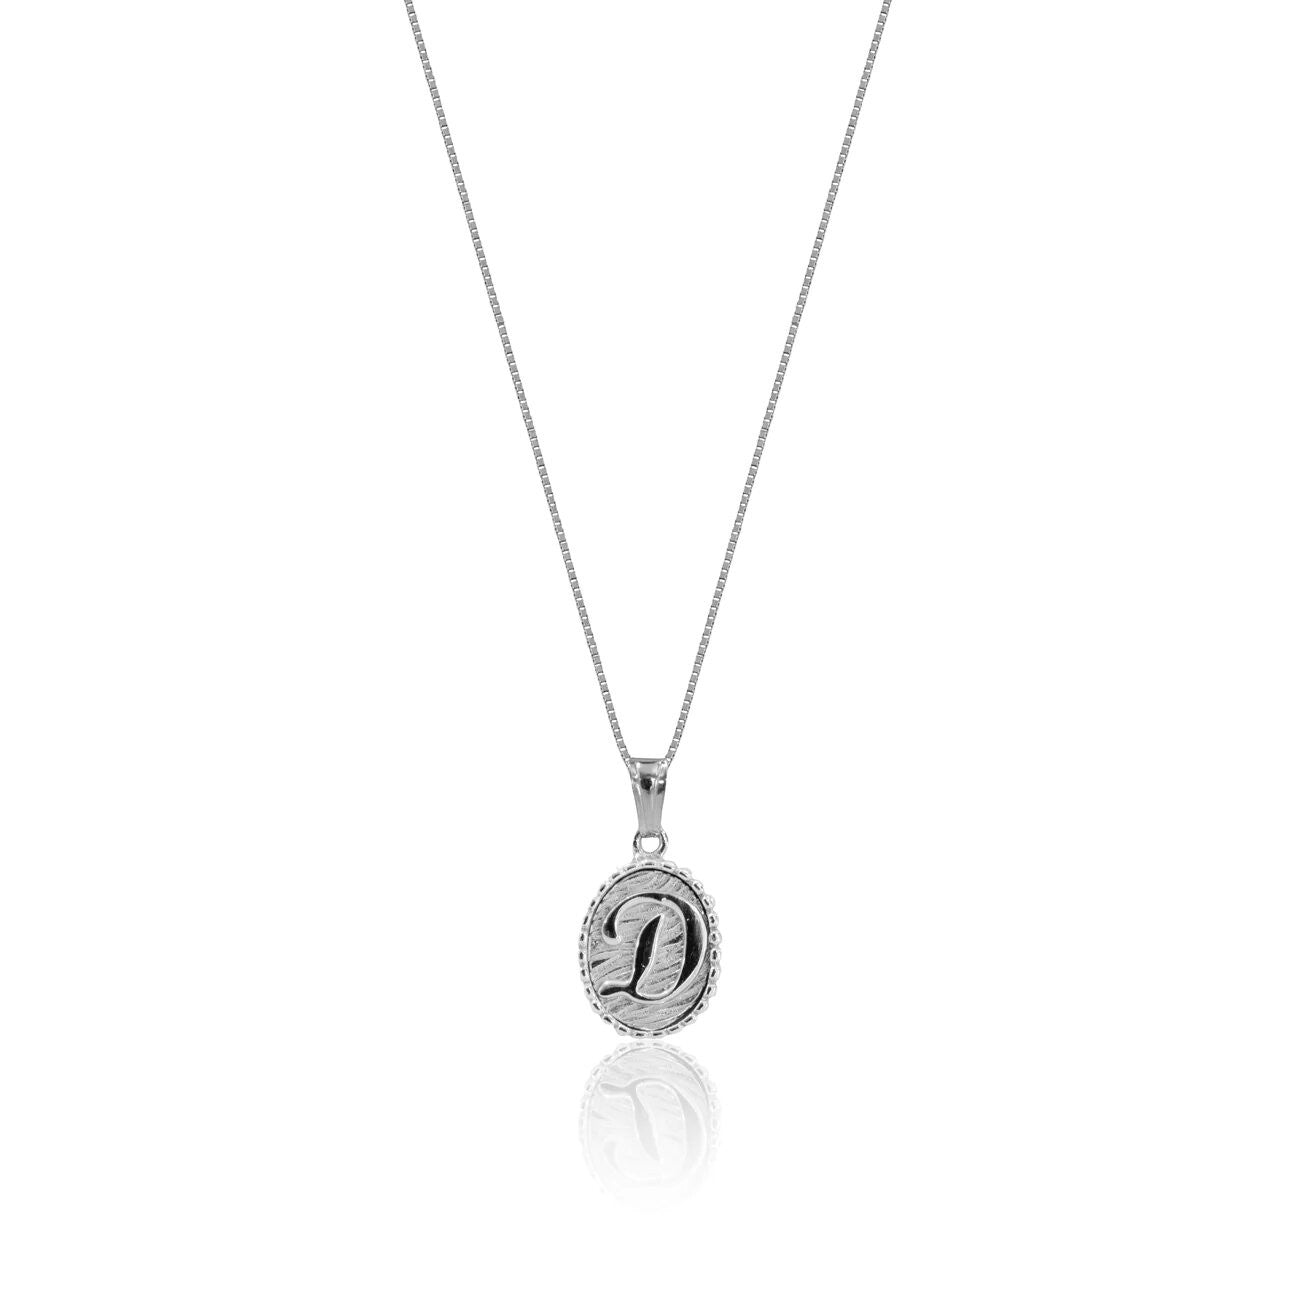 OvalLetter Necklace - Le Scritte dell'Amore